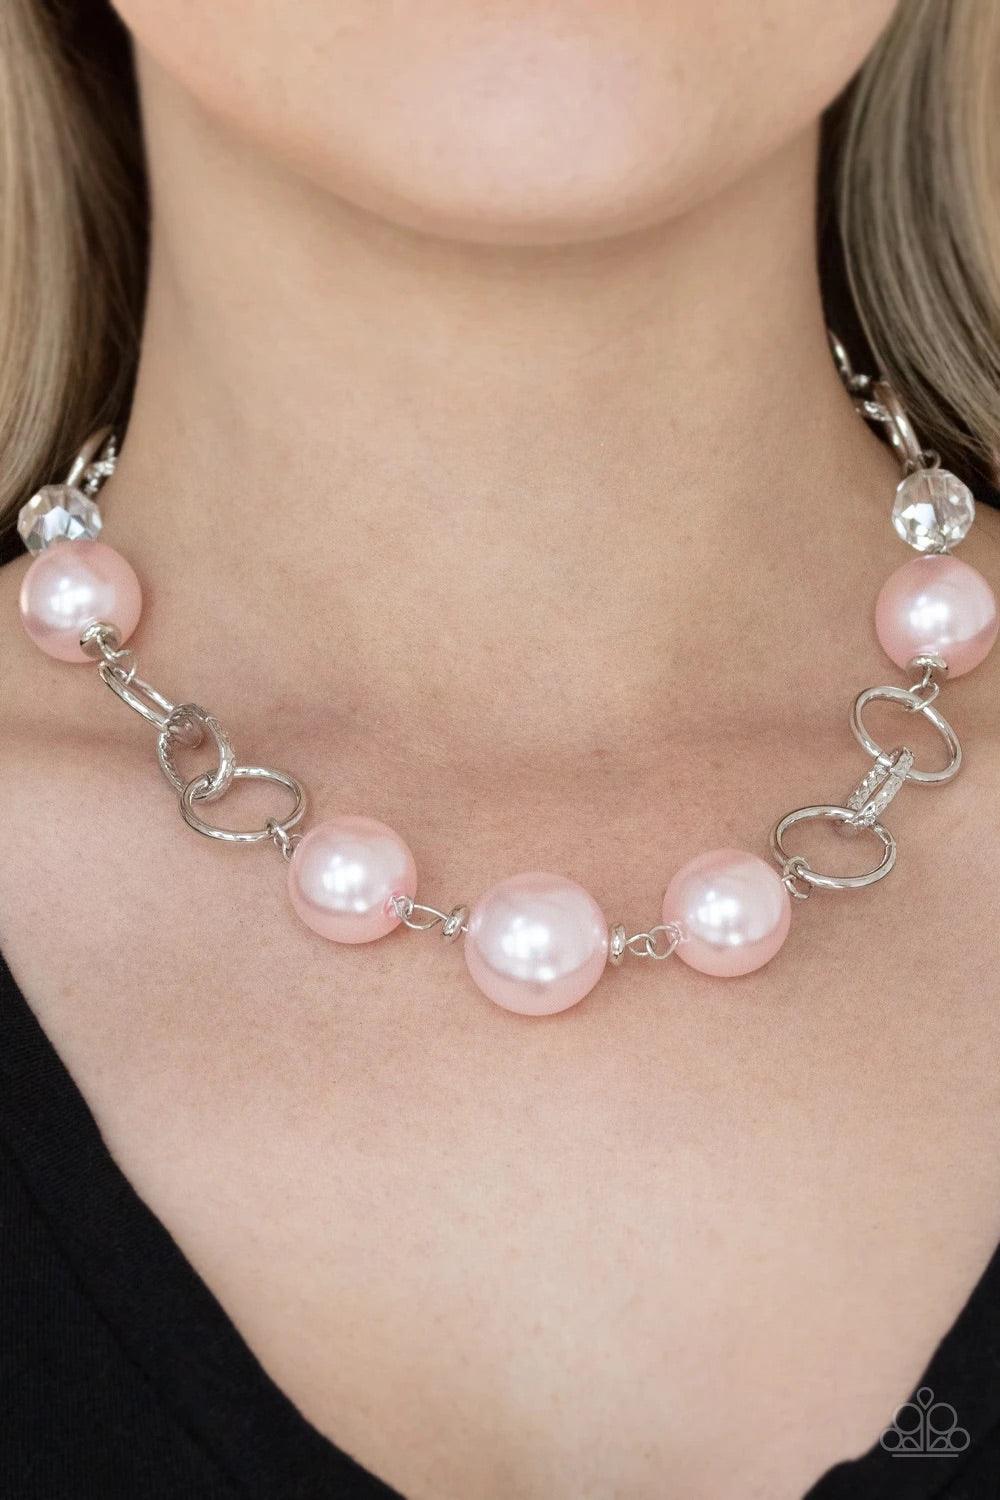 Paparazzi Accessories New Age Novelty - Pink Sections of bold silver links, oversized pink pearls, and glassy crystal-like beads haphazardly connect below the collar, creating a dramatic display. Features an adjustable clasp closure. Sold as one individua